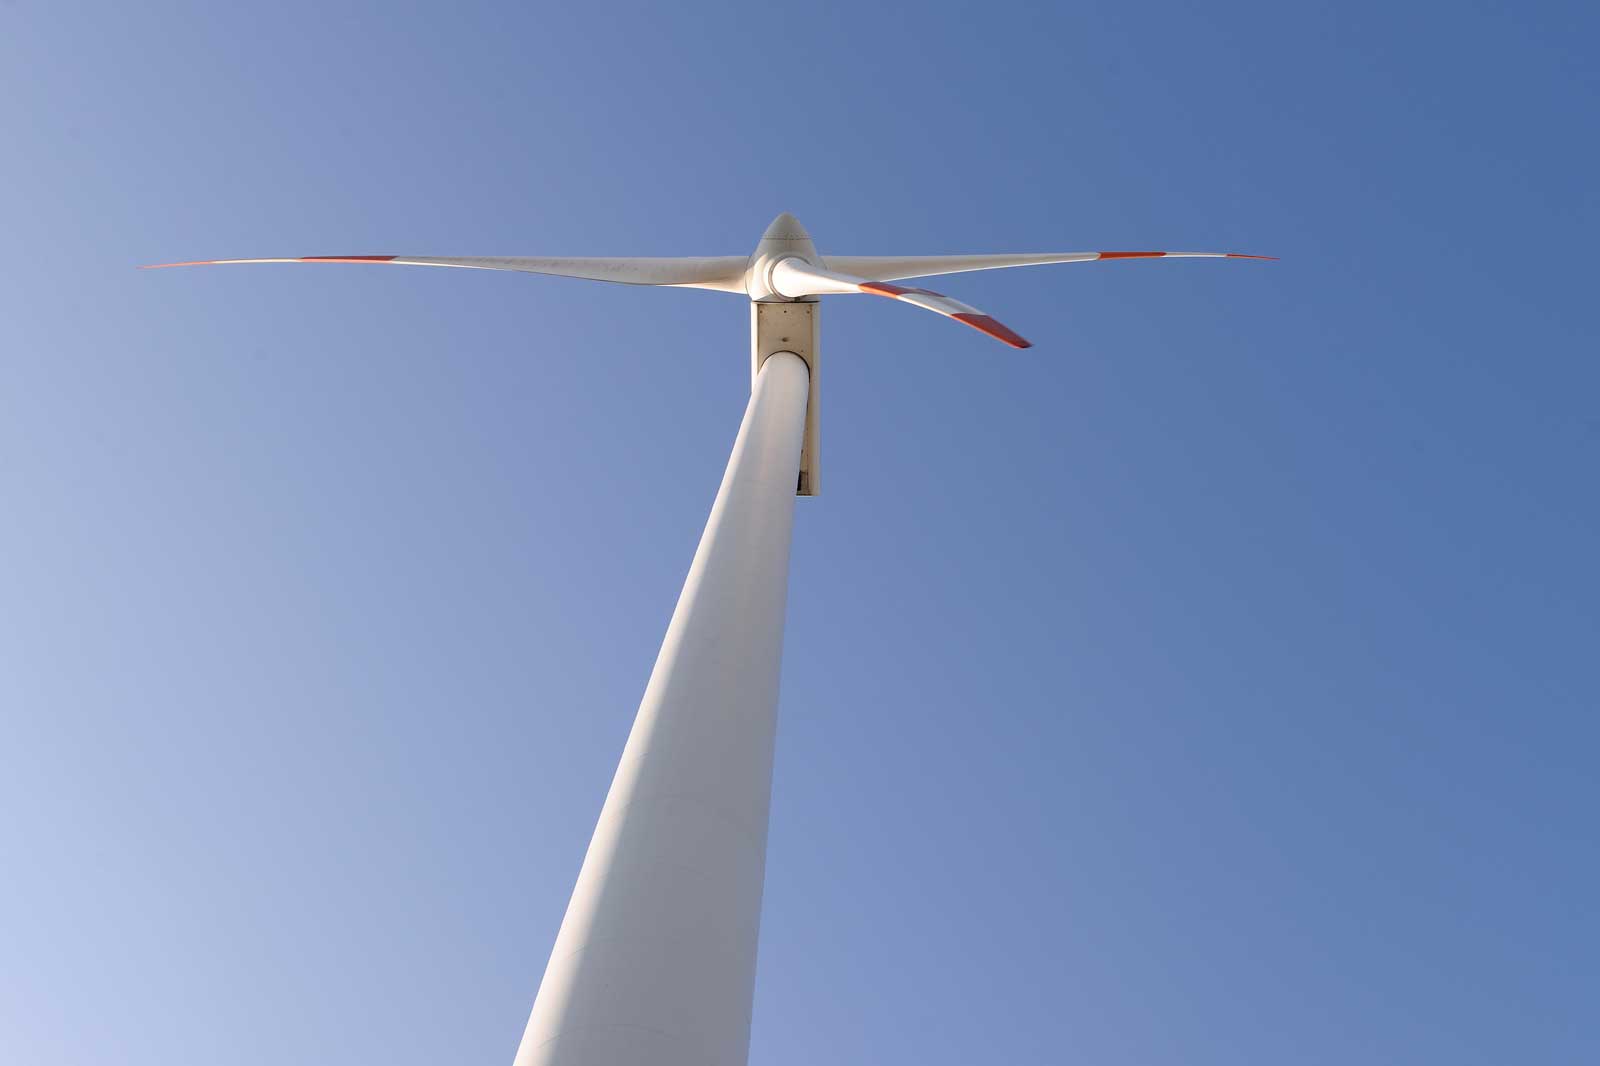 Breaking ground in Lower Saxony: RWE to construct new wind farm in Evendorf